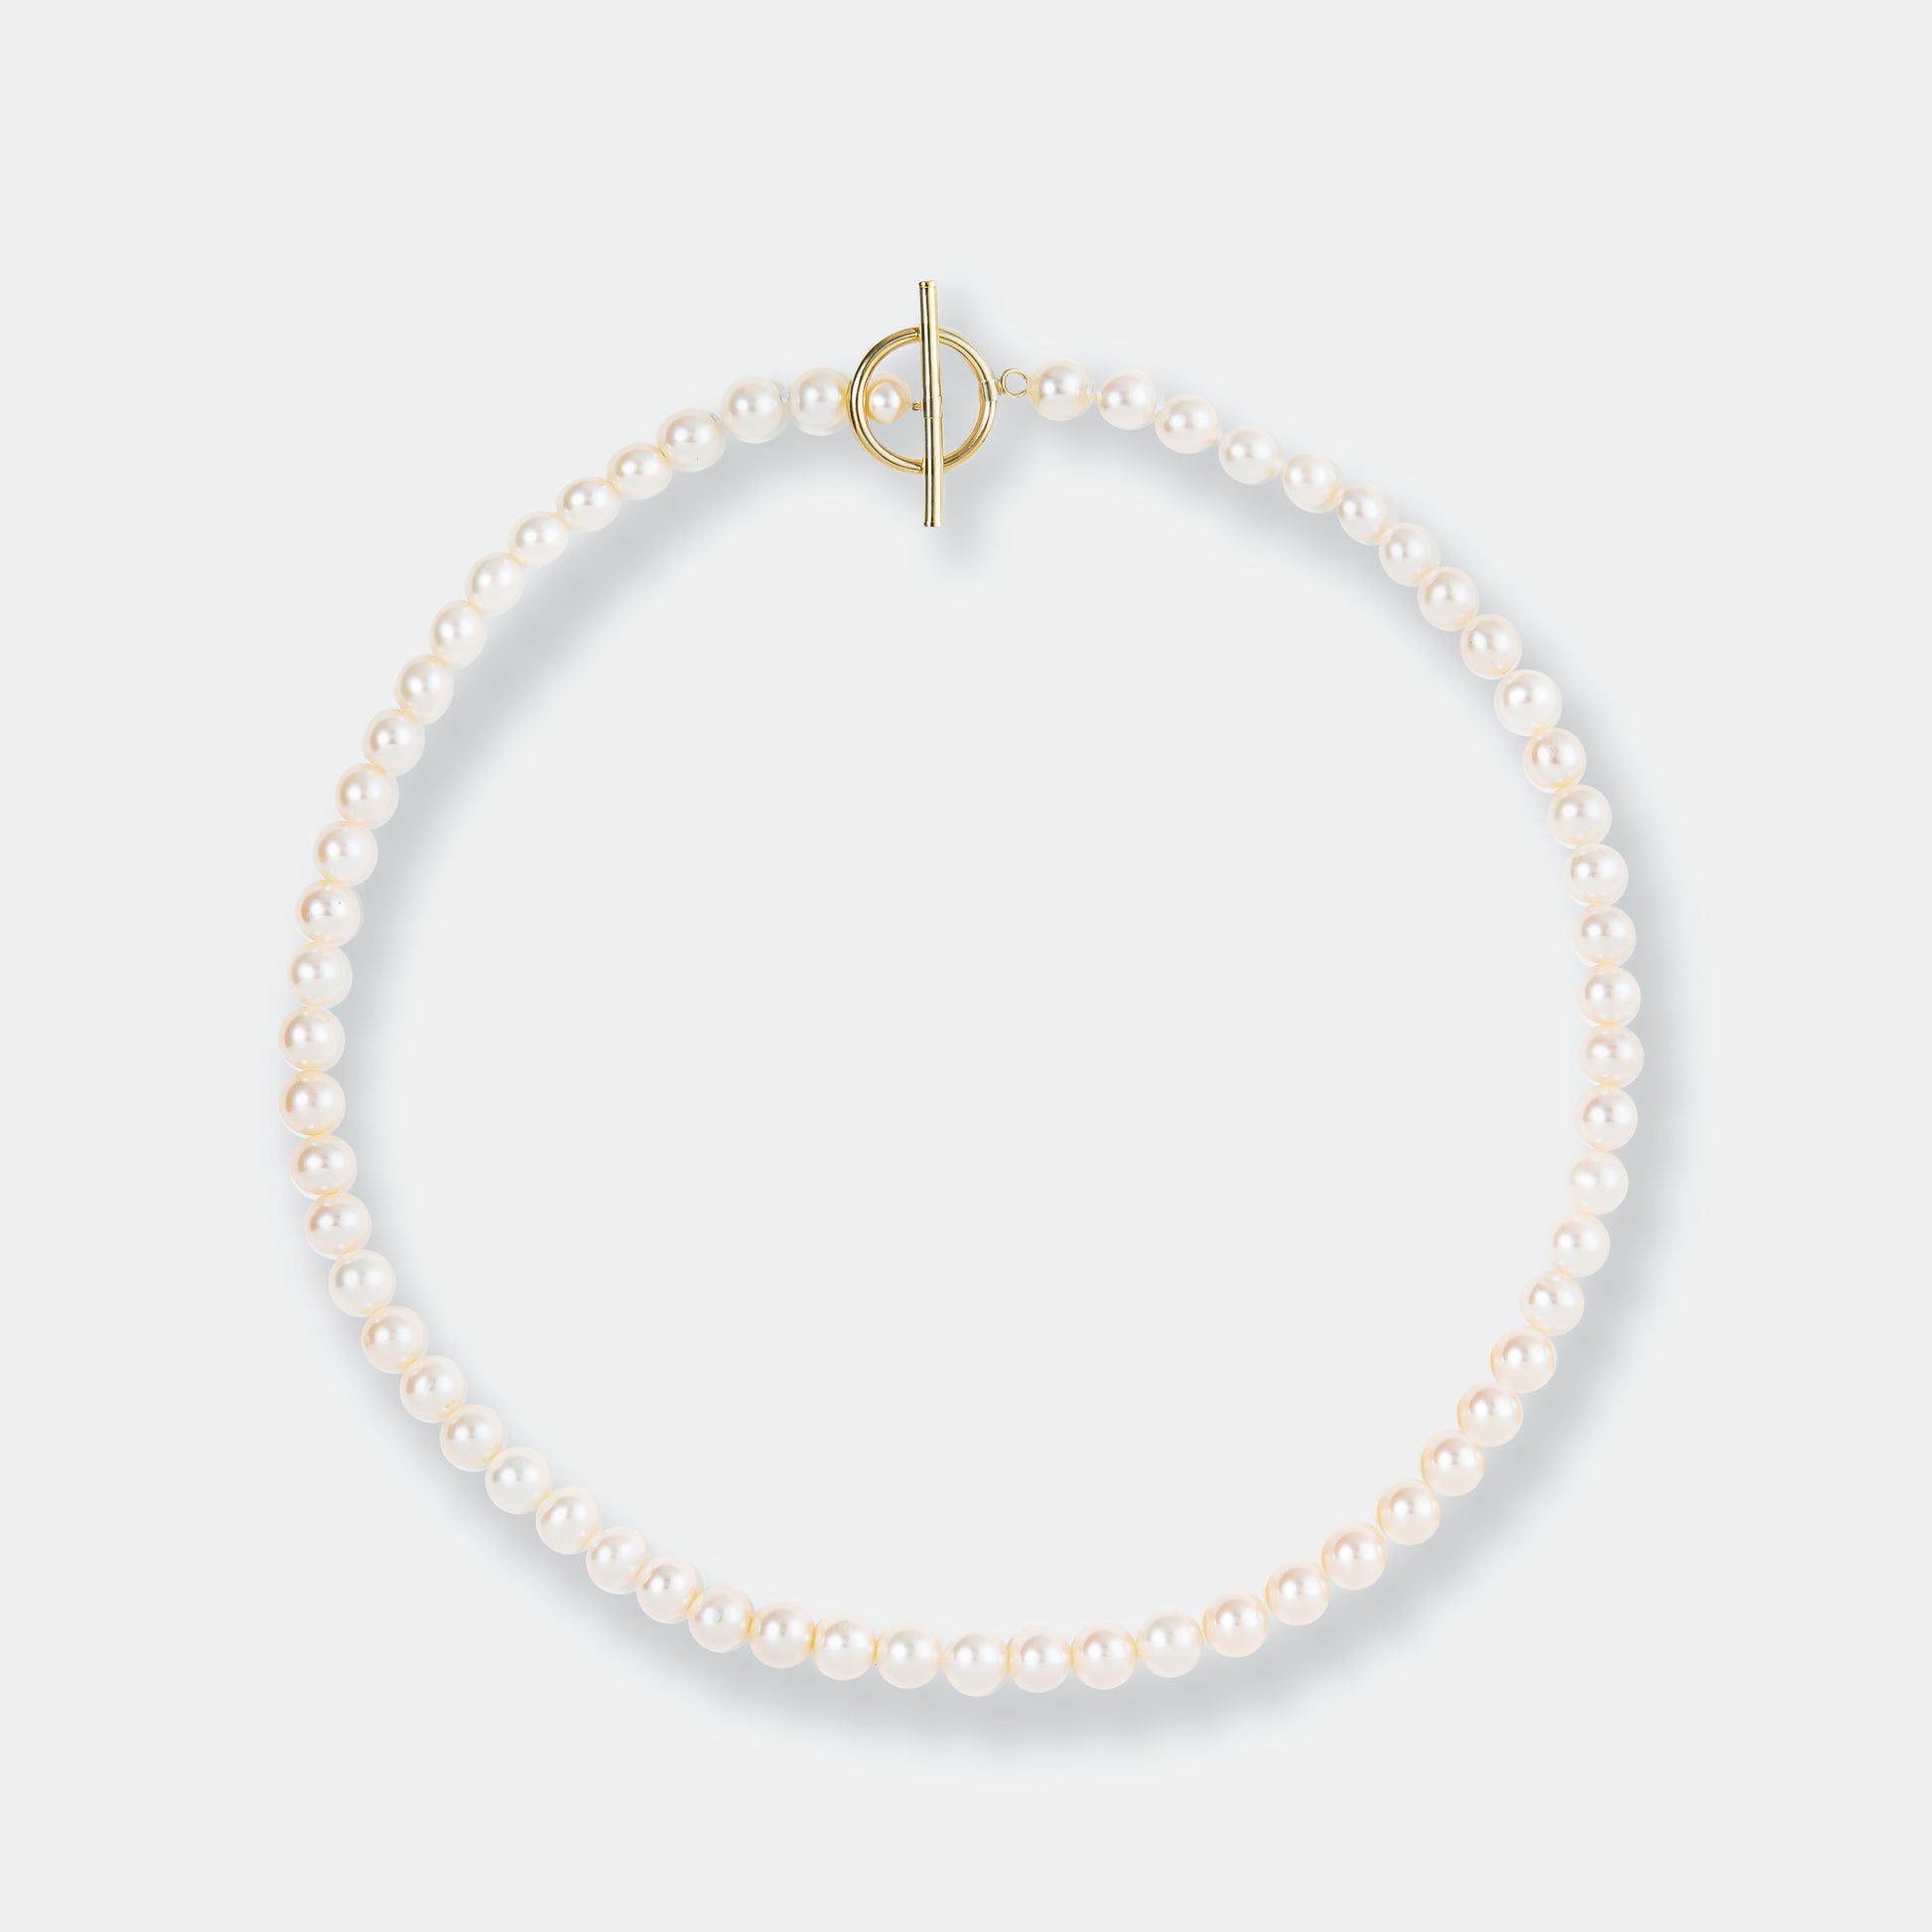 An exquisite pearl bracelet featuring a gold clasp and a delicate pearl, complementing the Mantel Pearl Necklace Short.